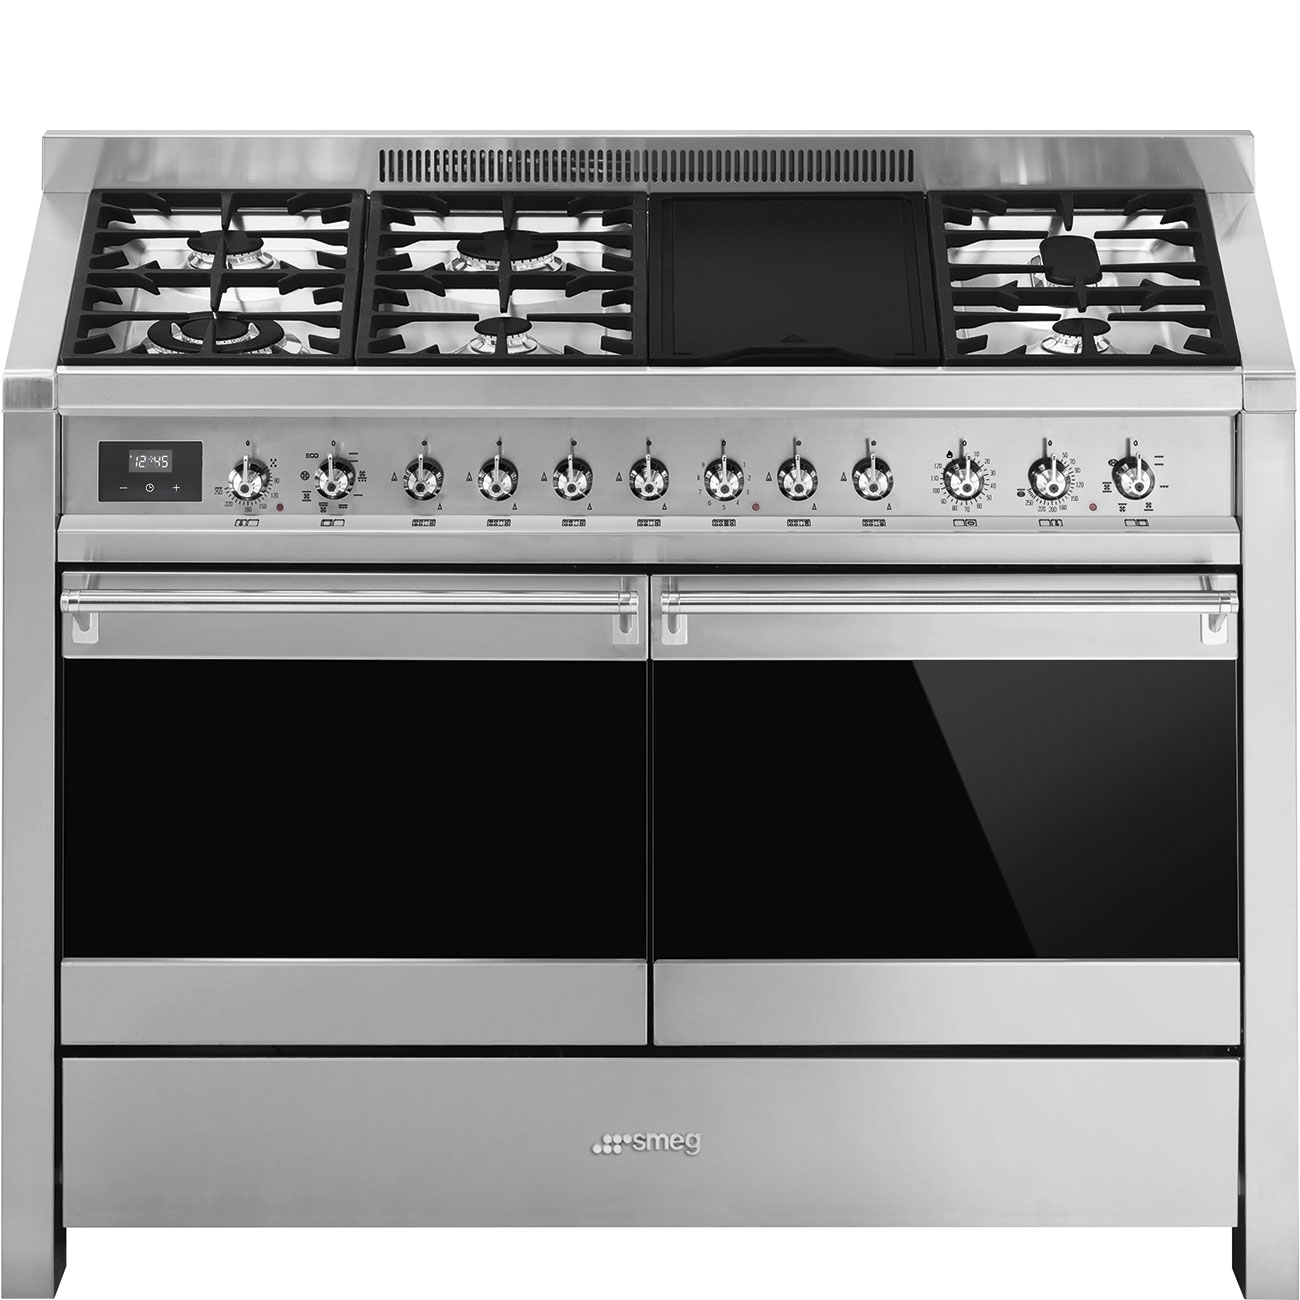 Smeg A4-81 120cm ‘Opera’ Dual Fuel Range Cooker – Stainless Steel